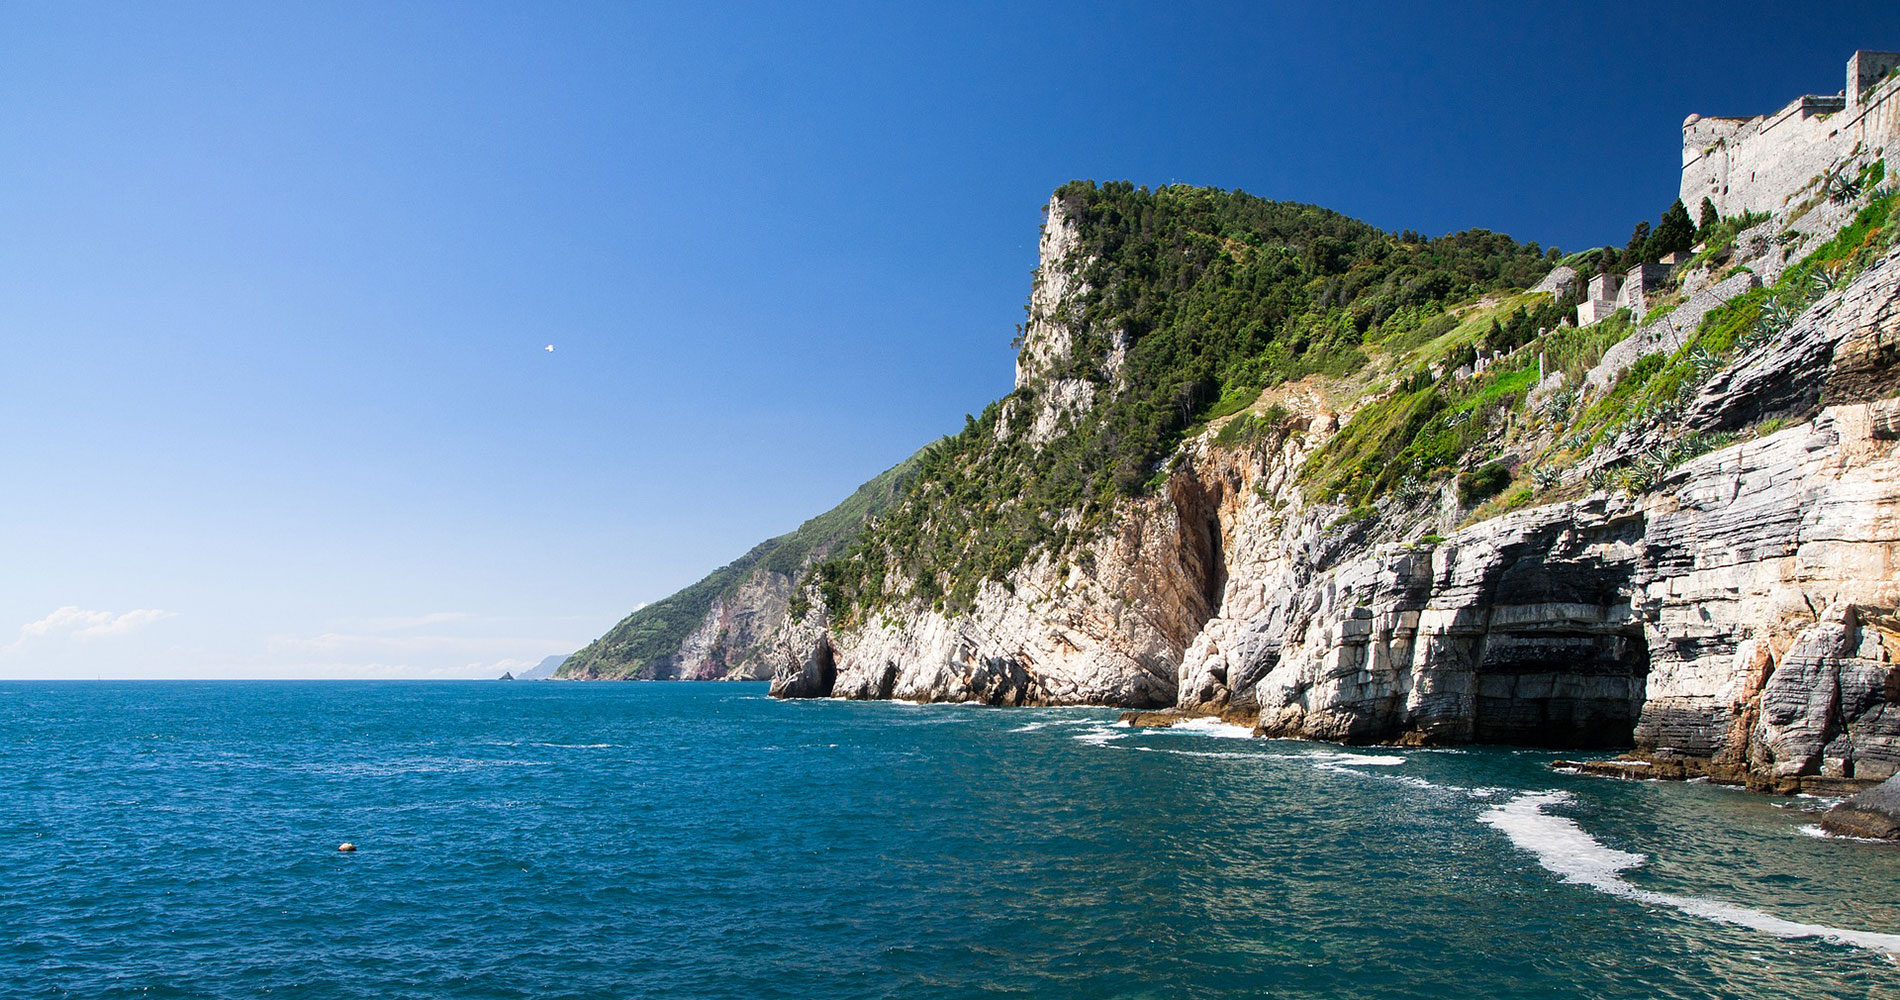 View from the sea of the natural rock climbing wall of Porto Venere